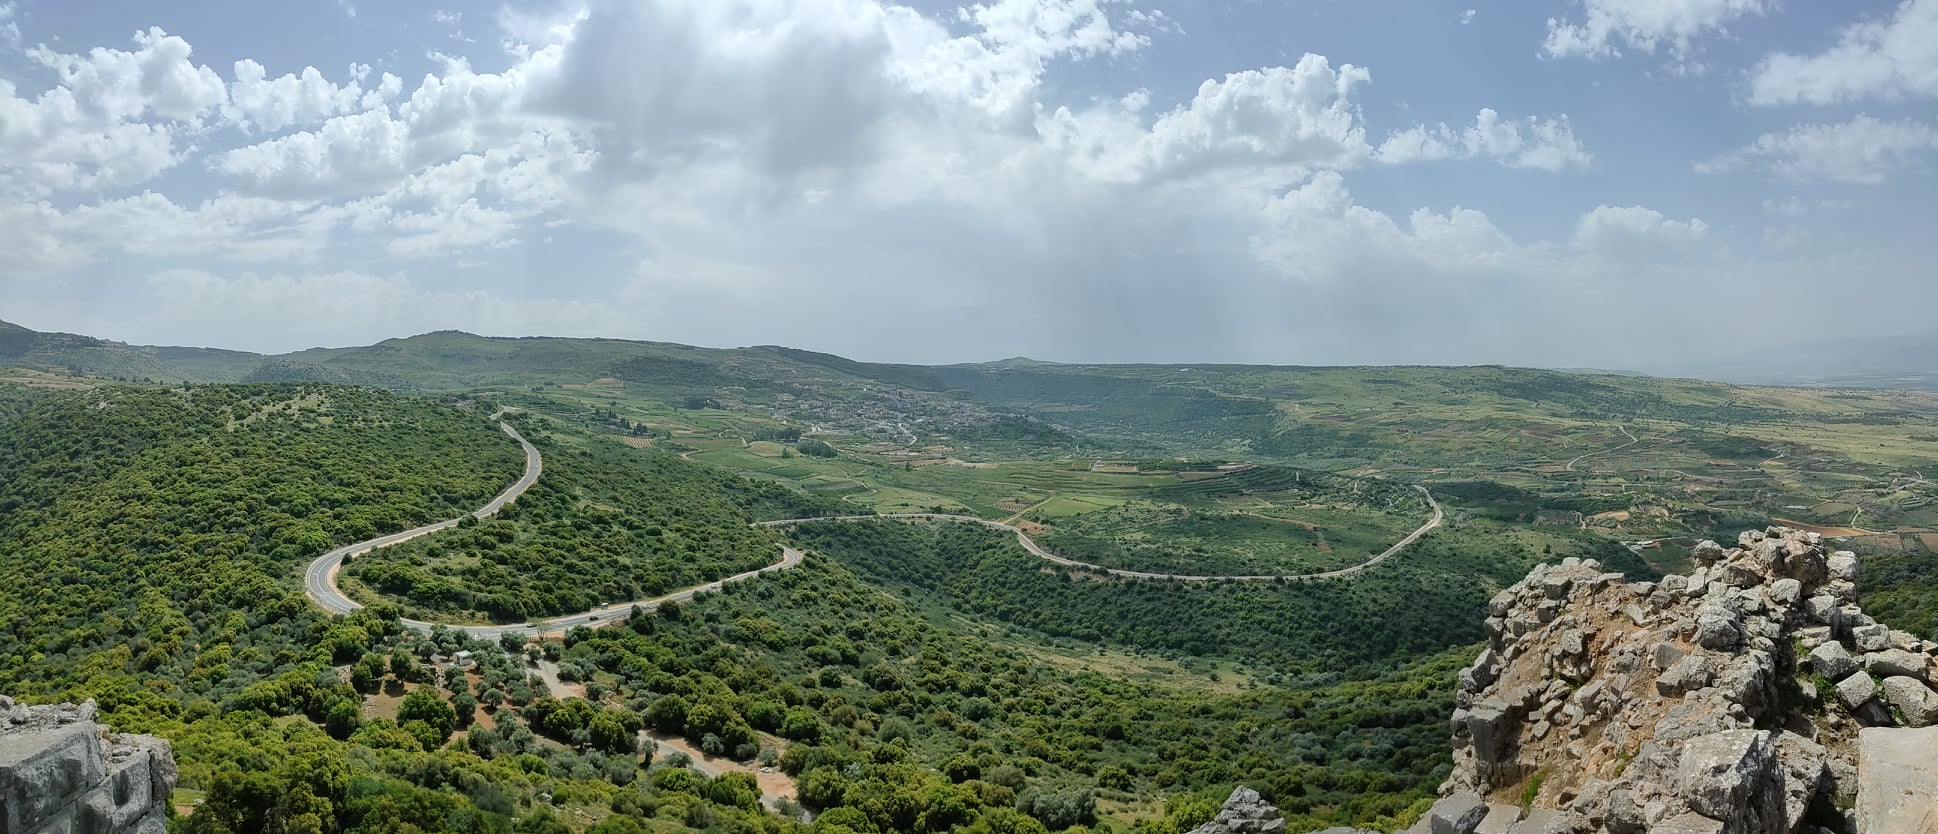 The Golan Heights view from Nimrod's Fortress